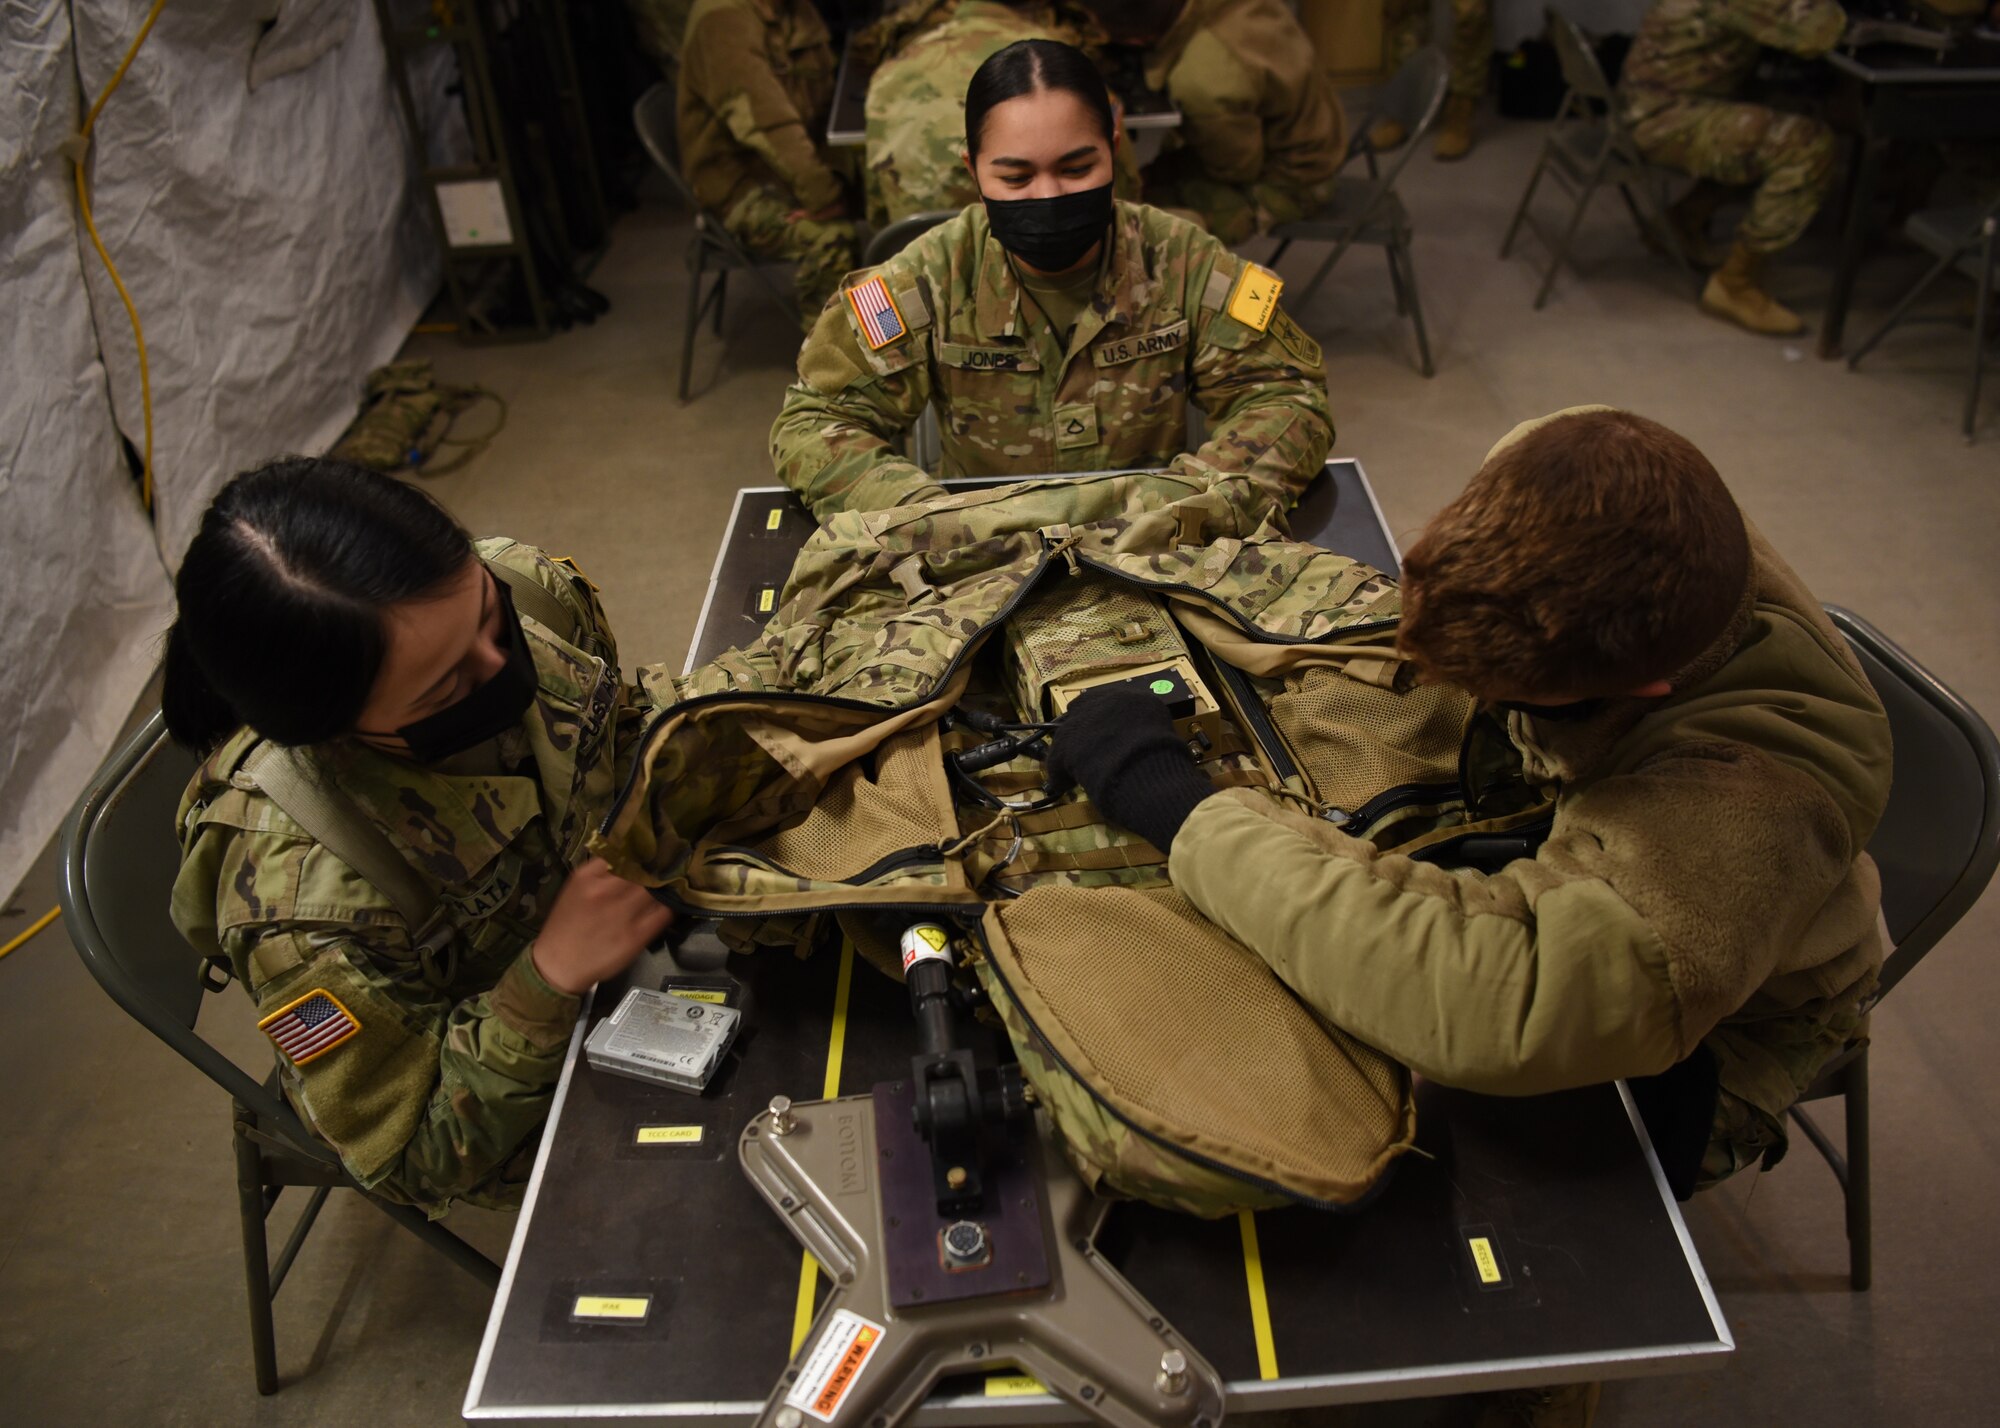 U.S. Army students assigned to the 344th Military Intelligence Battalion, participate in their joint capstone assessment at Goodfellow Air Force Base, Texas, Feb. 1, 2022. In line with the National Defense Strategy, the 17th Training Wings ensures service members develop and hone their skills by utilizing realistic hands-on training tactics with innovative, advanced, and capable intelligence equipment. (U.S. Air Force photo by Senior Airman Abbey Rieves)